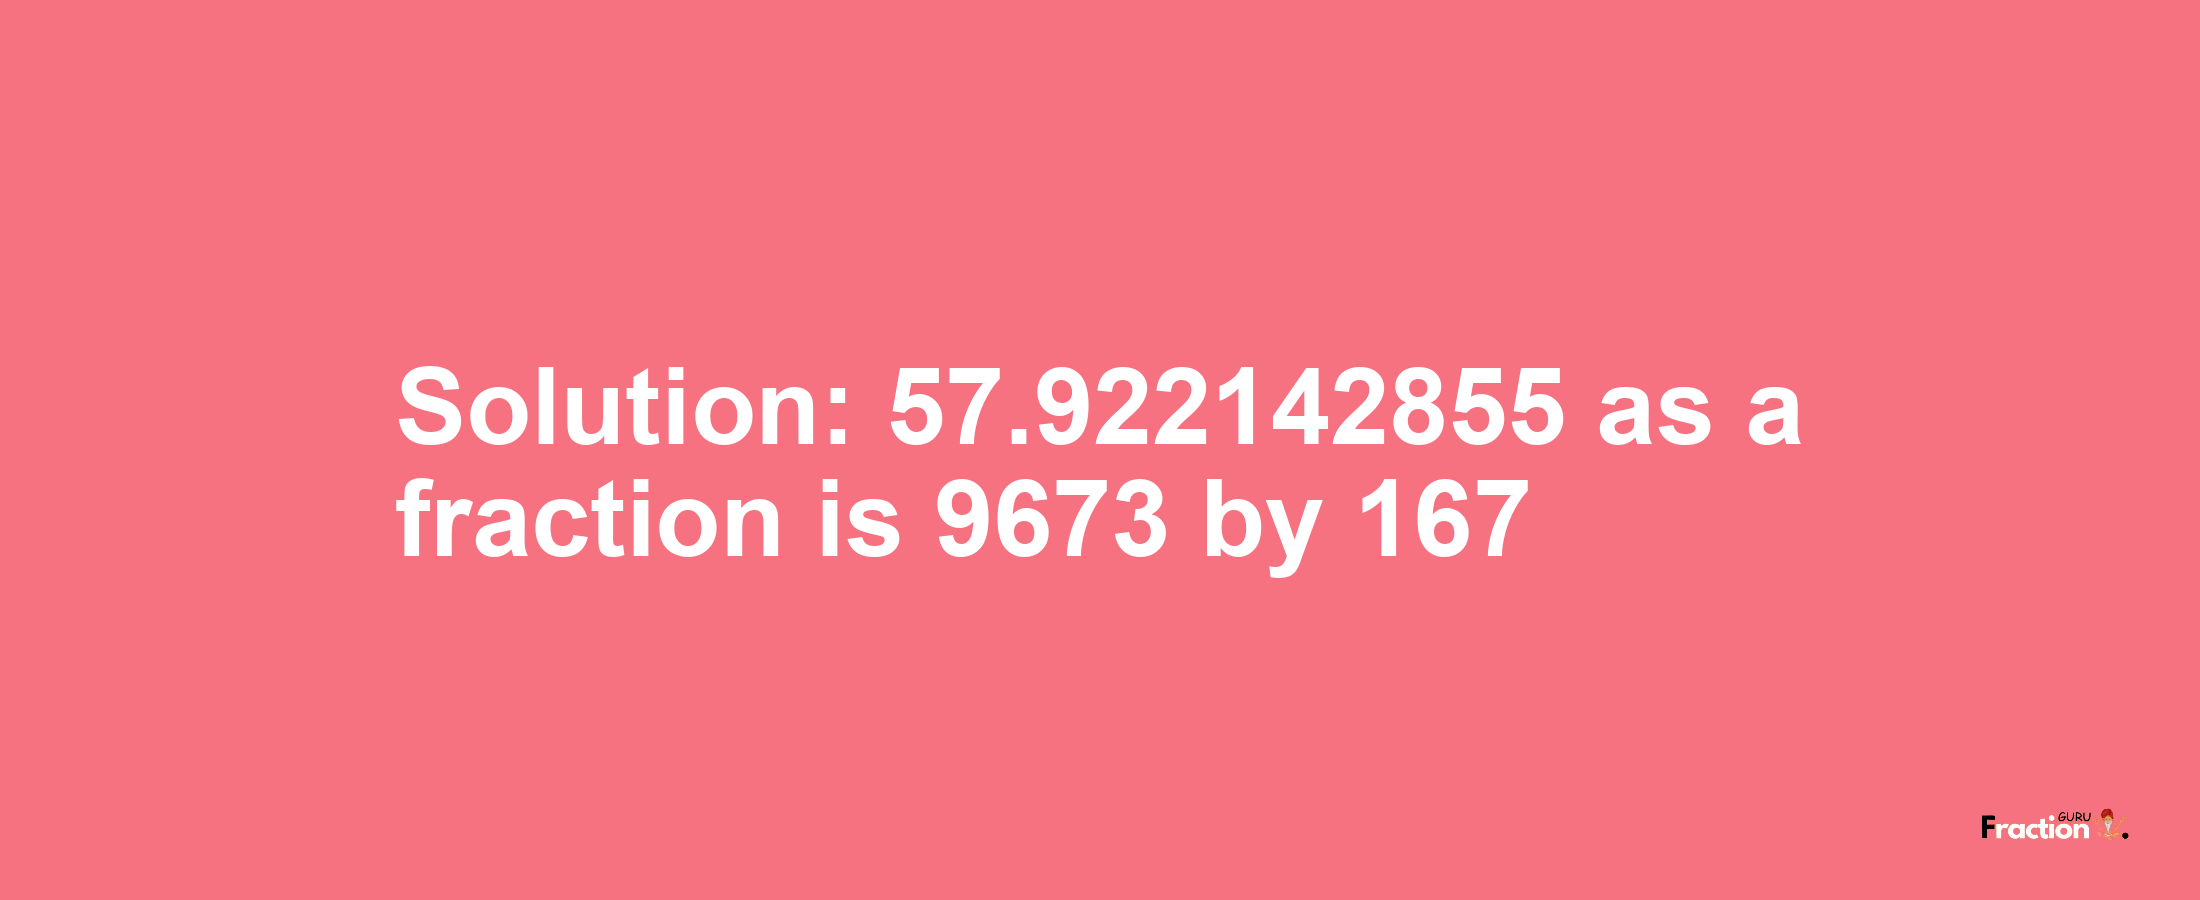 Solution:57.922142855 as a fraction is 9673/167